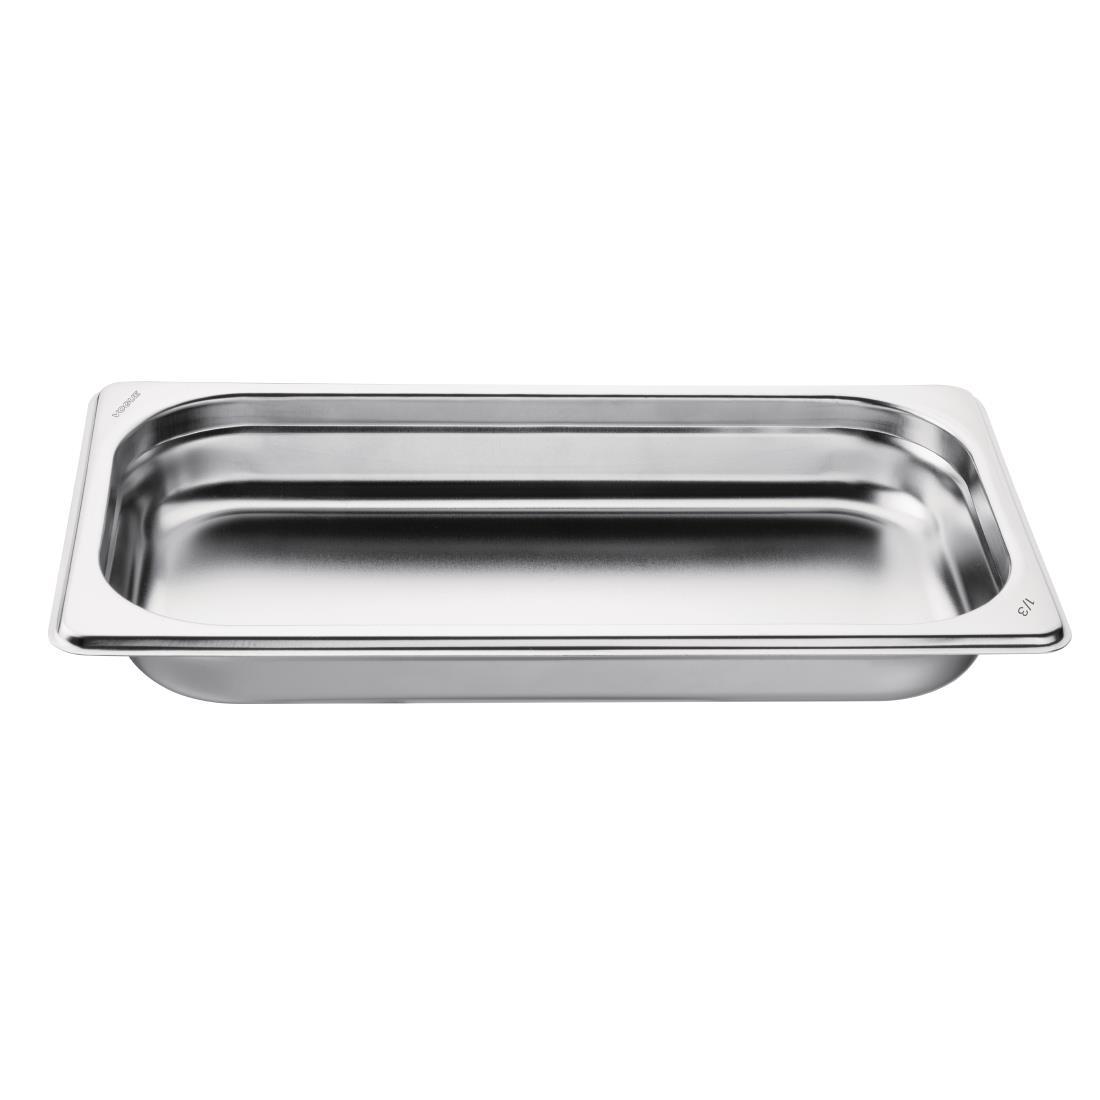 Vogue Stainless Steel 1/3 Gastronorm Pan 40mm - GM311  - 3